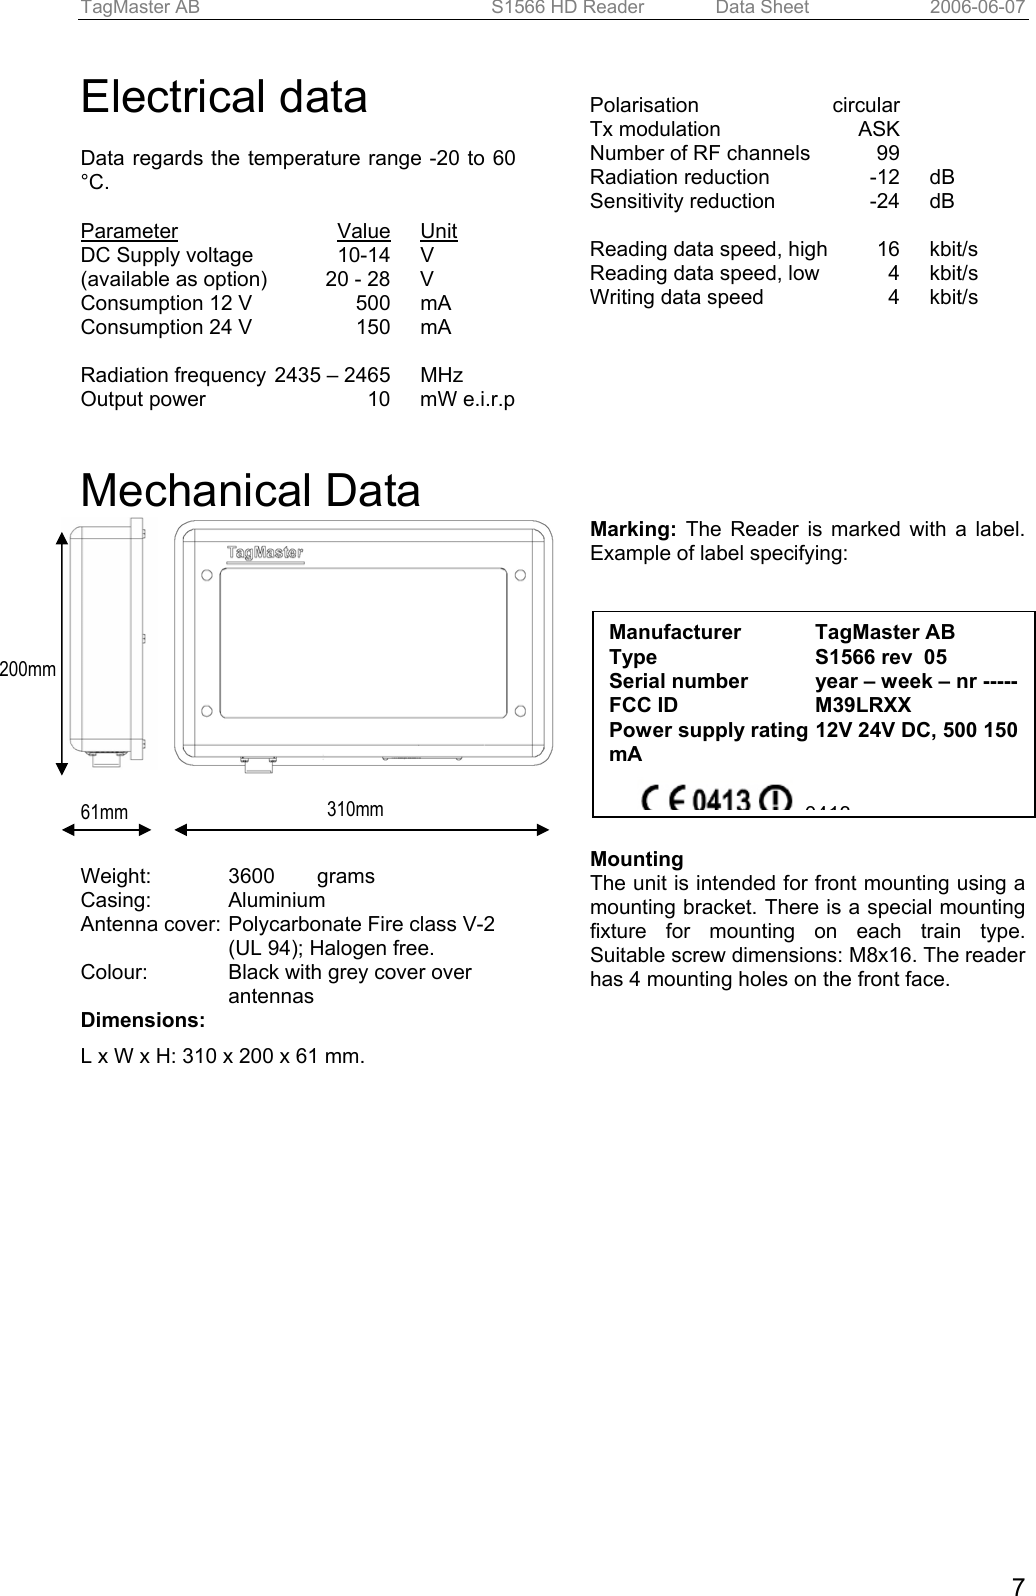 TagMaster AB  S1566 HD Reader   Data Sheet  2006-06-07  7Electrical data  Data regards the temperature range -20 to 60 °C.  Parameter Value Unit DC Supply voltage  10-14  V (available as option)  20 - 28  V Consumption 12 V  500  mA Consumption 24 V  150  mA  Radiation frequency  2435 – 2465  MHz Output power  10  mW e.i.r.p  Polarisation circular Tx modulation   ASK Number of RF channels  99 Radiation reduction  -12  dB Sensitivity reduction  -24  dB  Reading data speed, high   16  kbit/s Reading data speed, low  4  kbit/s Writing data speed   4  kbit/s    Mechanical Data              Weight: 3600  grams Casing: Aluminium Antenna cover:  Polycarbonate Fire class V-2 (UL 94); Halogen free. Colour:   Black with grey cover over antennas Dimensions: L x W x H: 310 x 200 x 61 mm.  Marking: The Reader is marked with a label. Example of label specifying:   Mounting The unit is intended for front mounting using a mounting bracket. There is a special mounting fixture for mounting on each train type. Suitable screw dimensions: M8x16. The reader has 4 mounting holes on the front face. Manufacturer   TagMaster AB  Type   S1566 rev  05 Serial number  year – week – nr ----- FCC ID  M39LRXX Power supply rating  12V 24V DC, 500 150 mA  0413310mm 200mm 61mm 